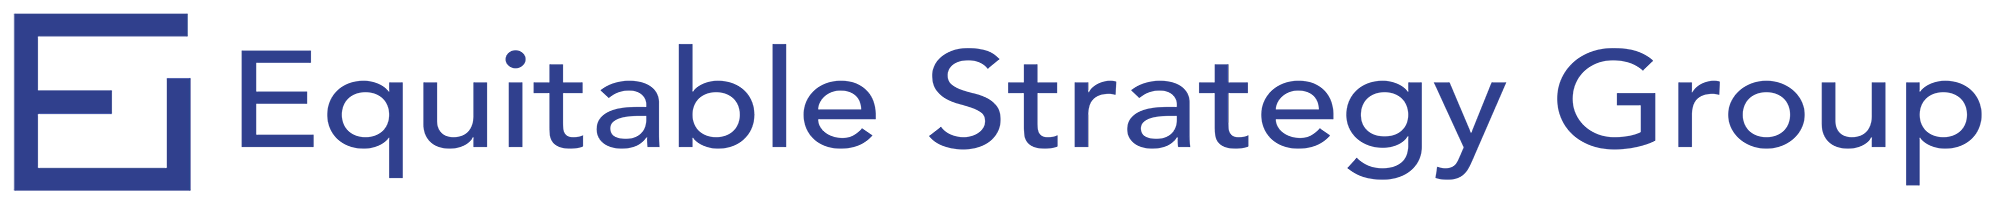 Equitable Strategy Group Logo